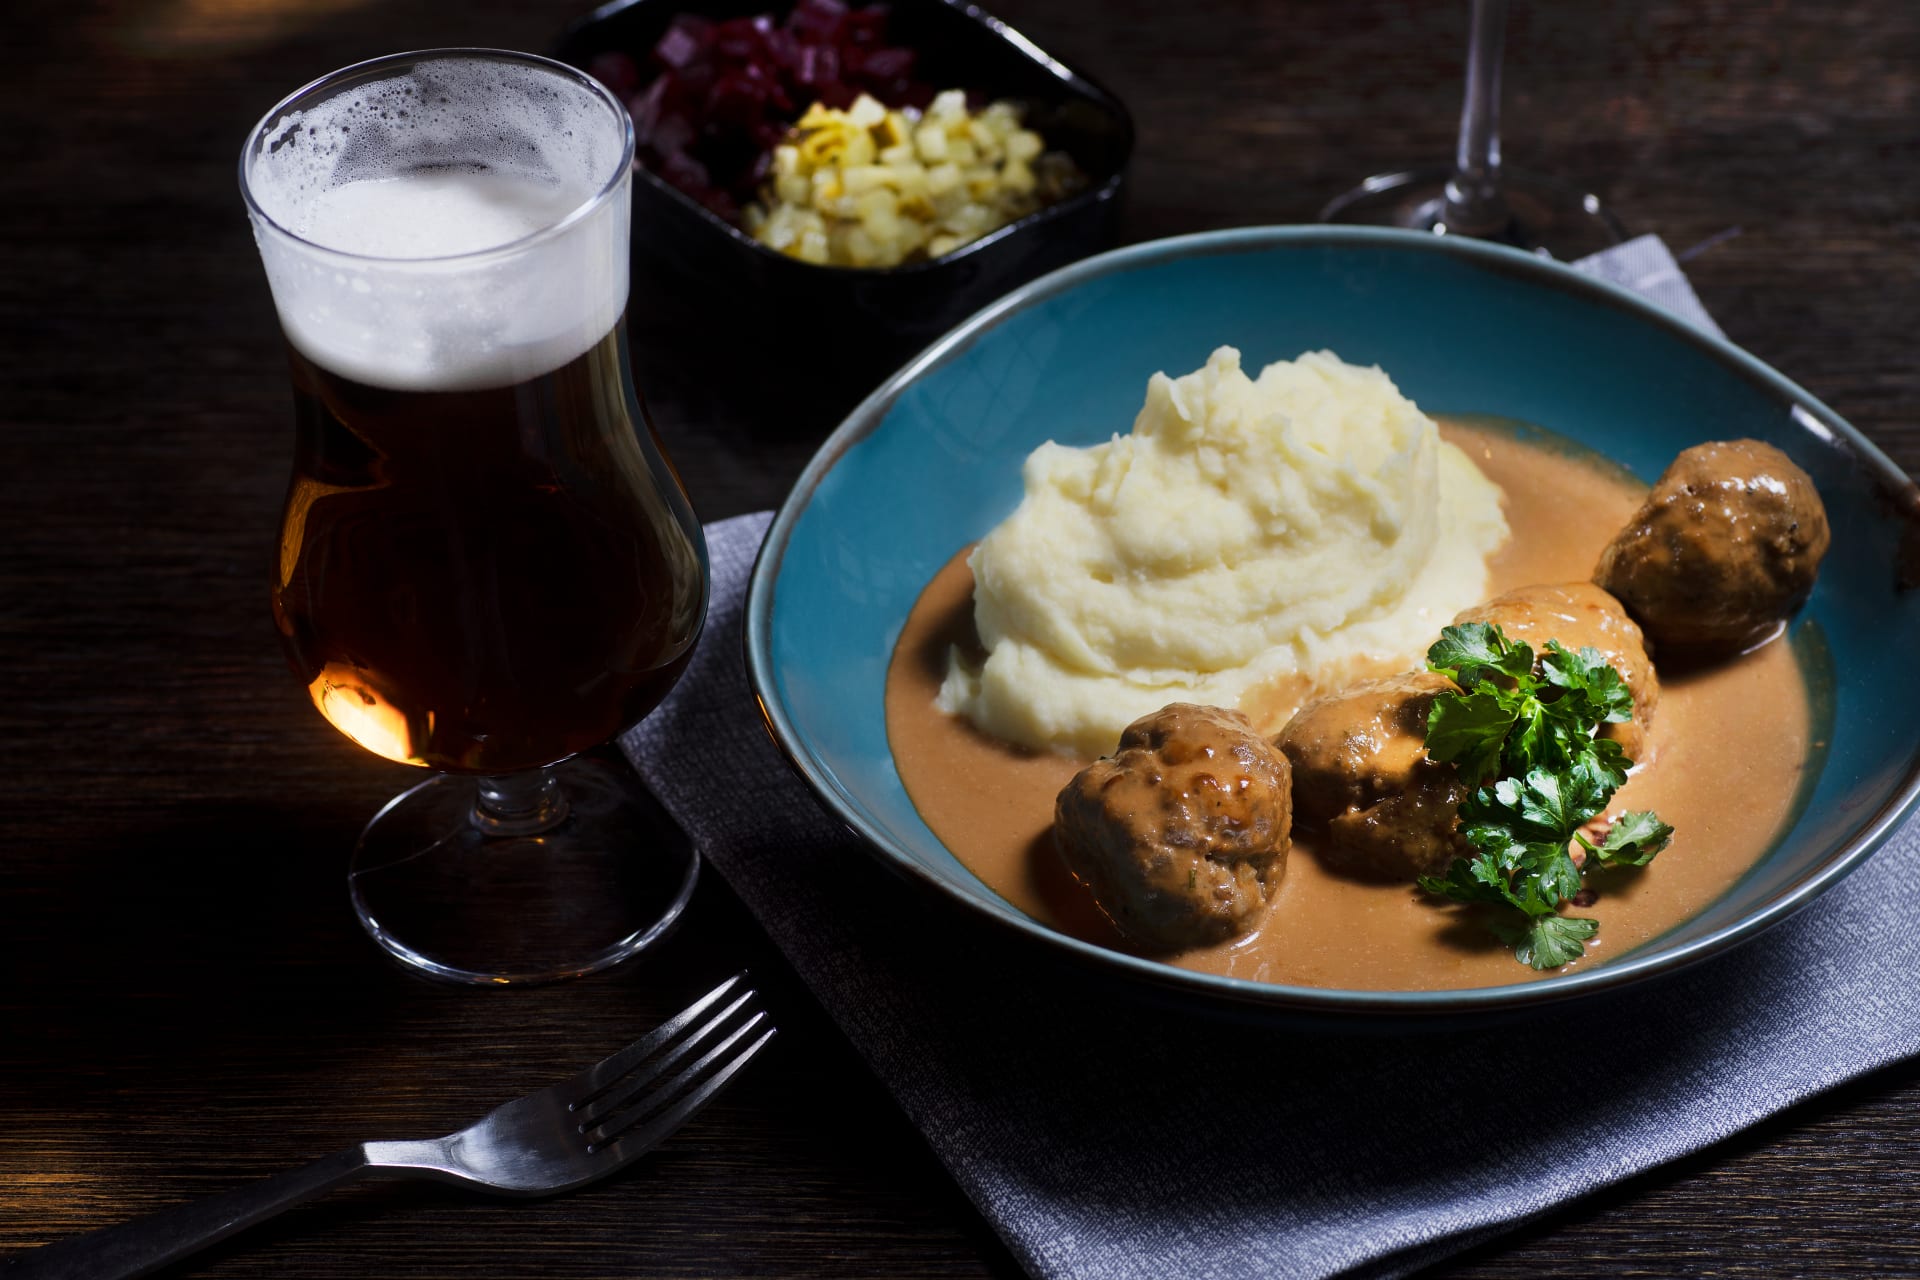 Restaurant Bellmanni Tampere, meatballs and mashed potatoes